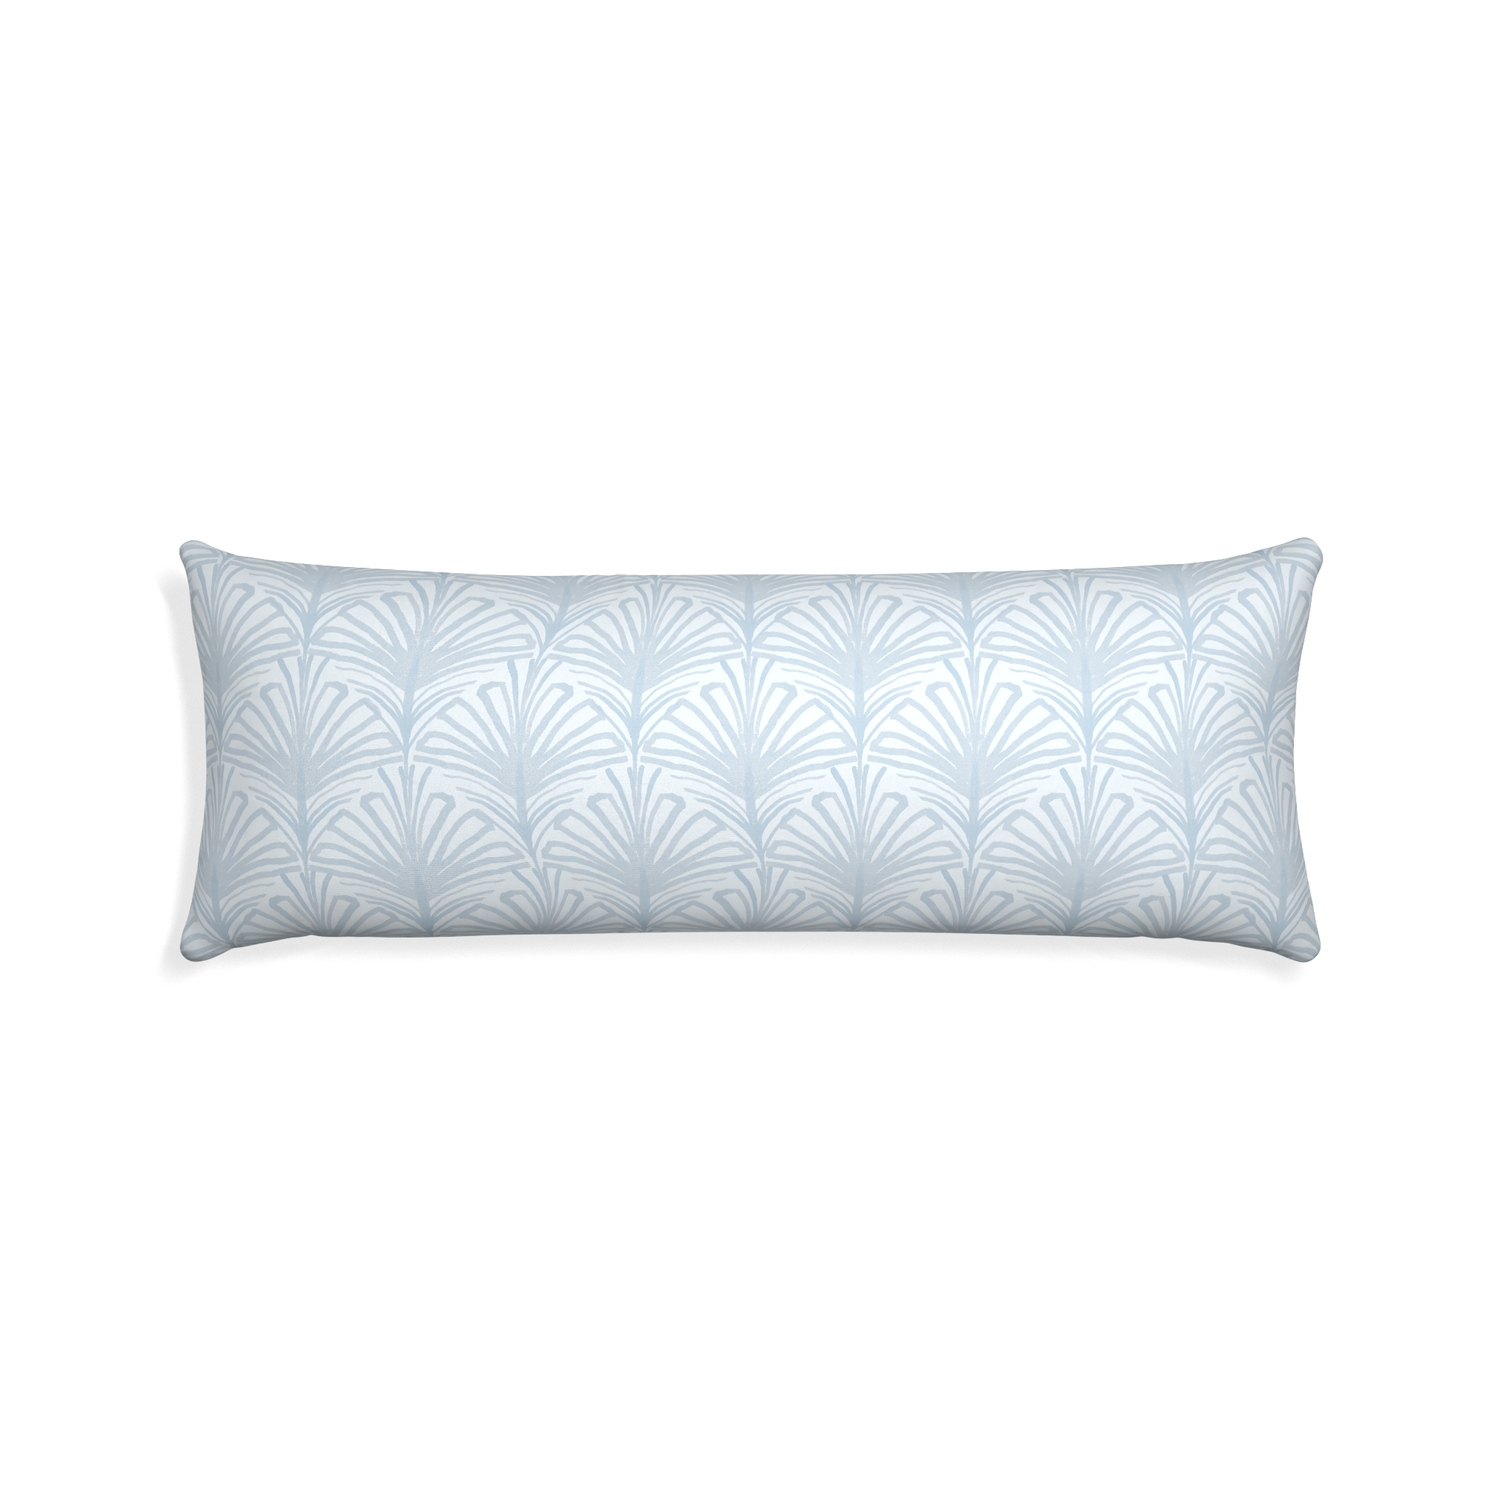 Xl-lumbar suzy sky custom pillow with none on white background